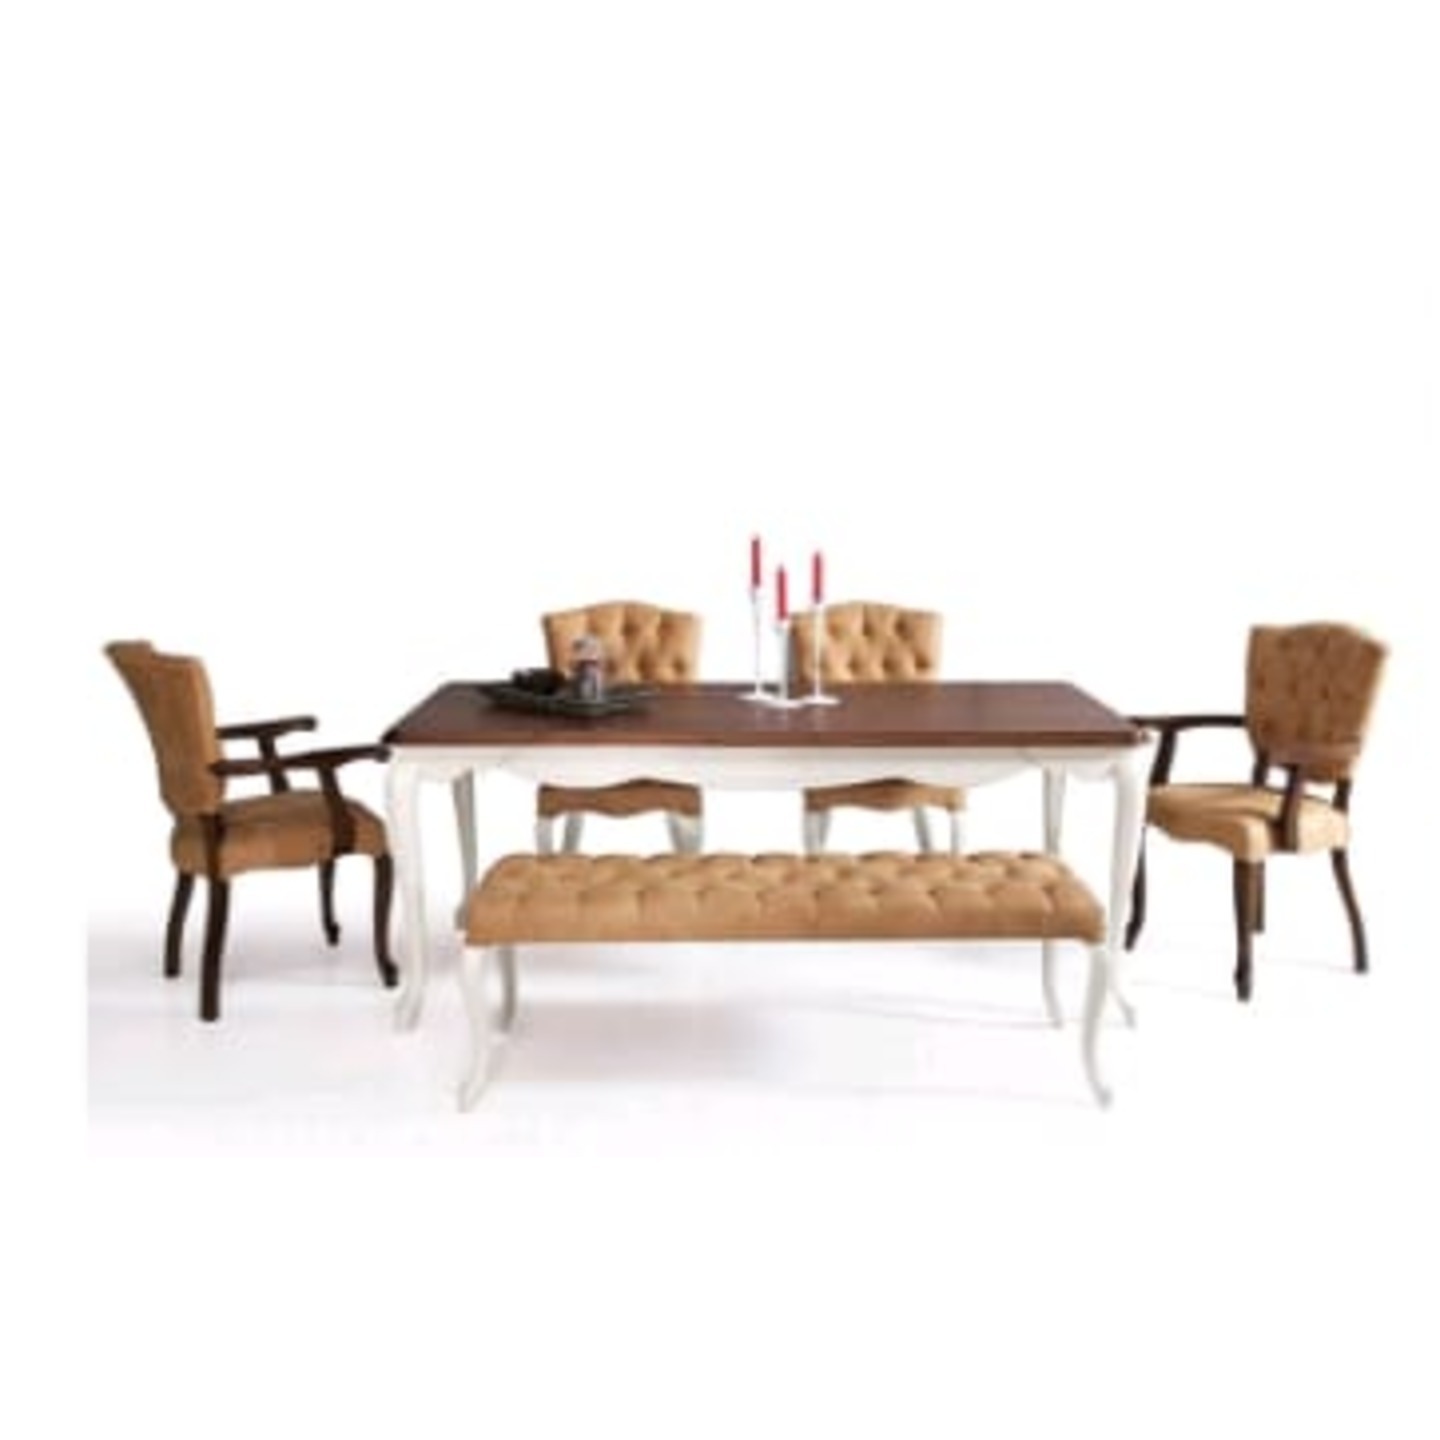 DW Marble Top H-005 Four Seater Dining Table Set in Brown Colour